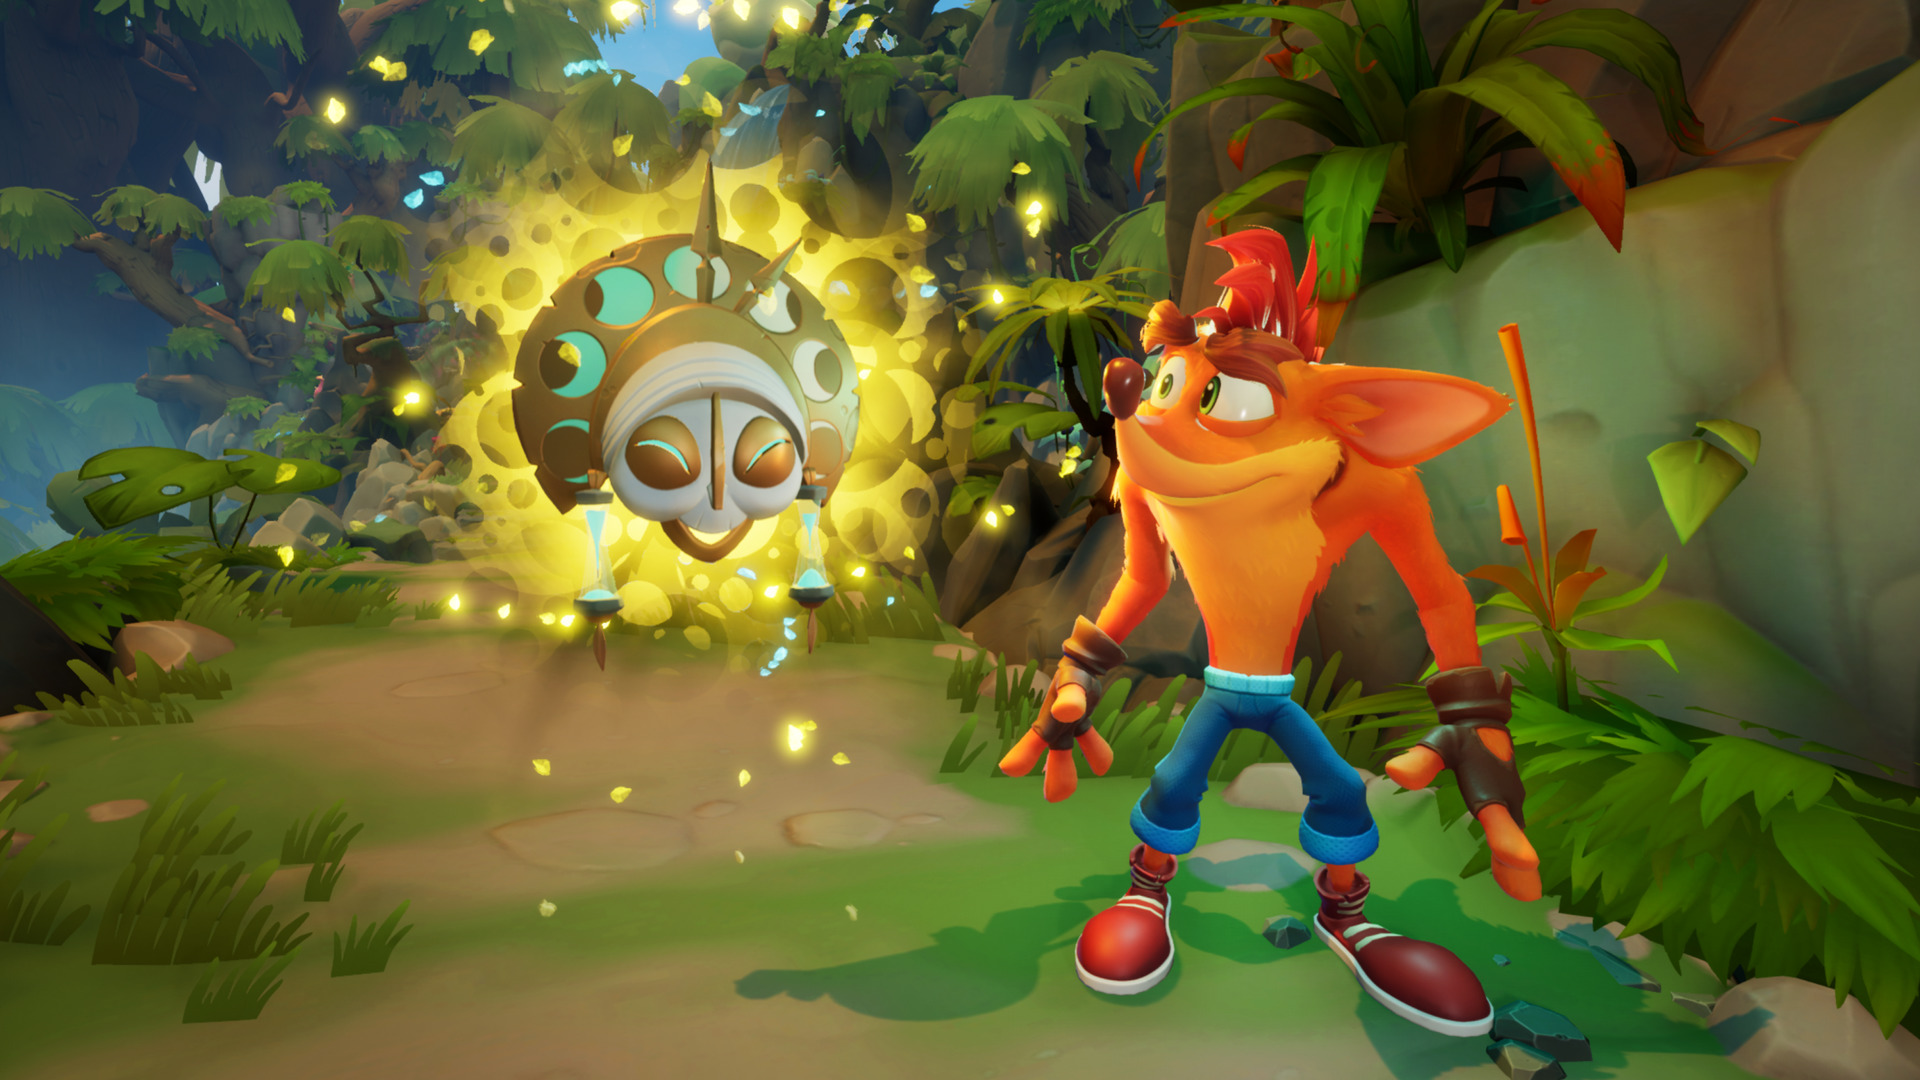 All The Exciting Shit To Look Forward To In The New Crash Bandicoot 4: It’s About Time